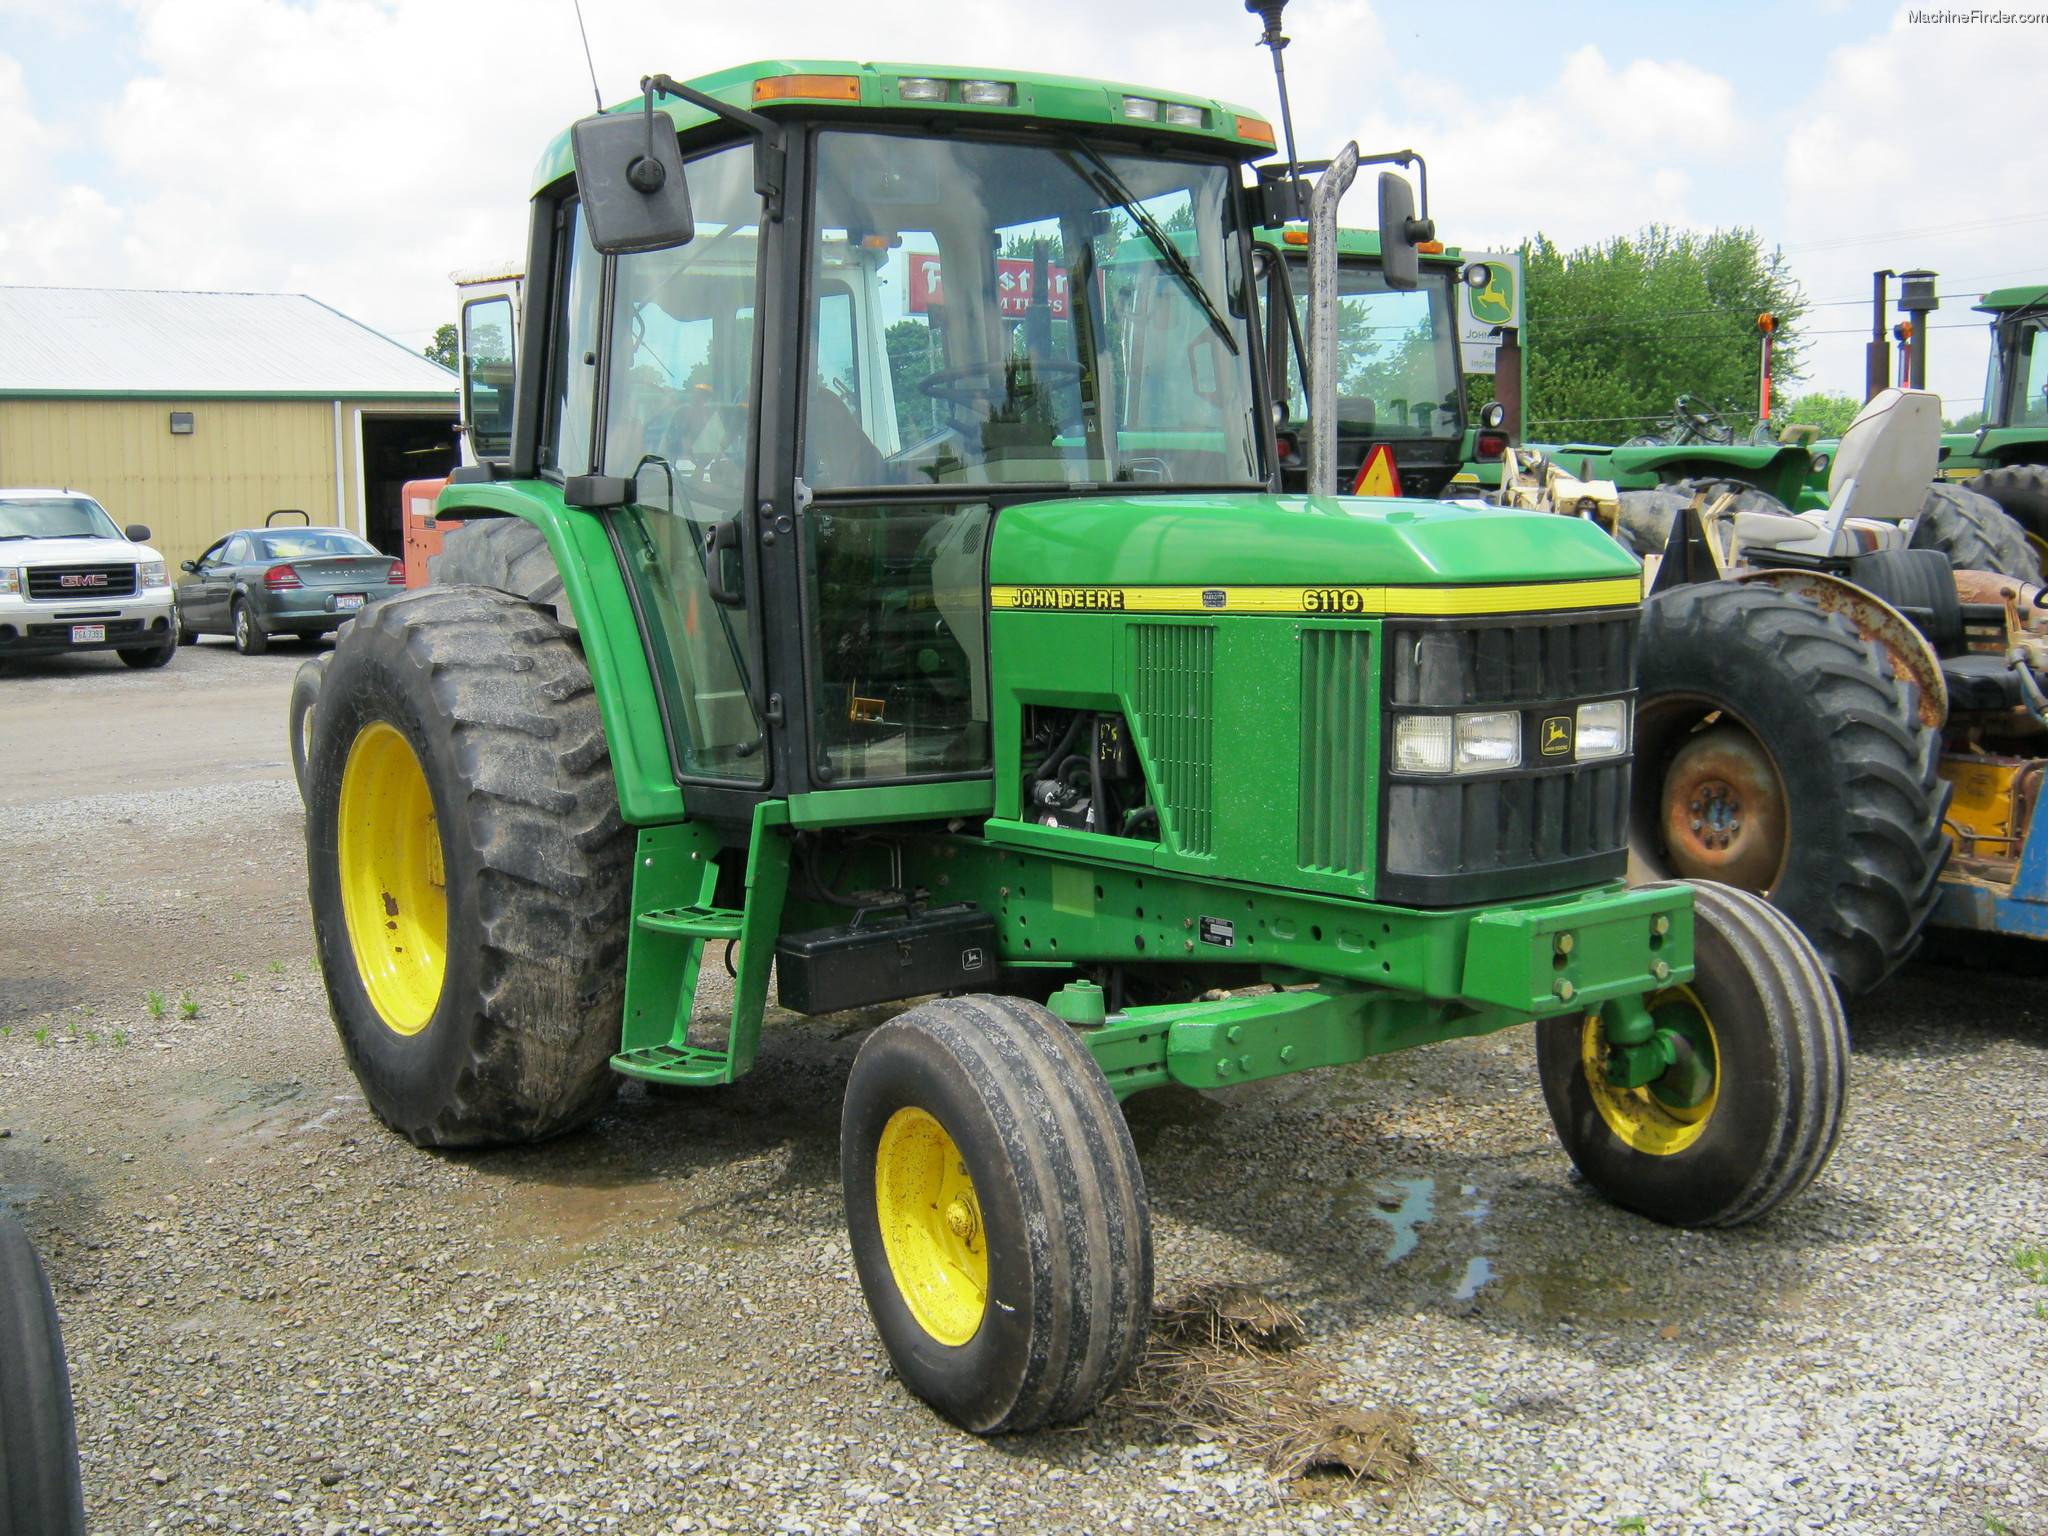 Latest john deere 6110 b price, specification, & review 2023